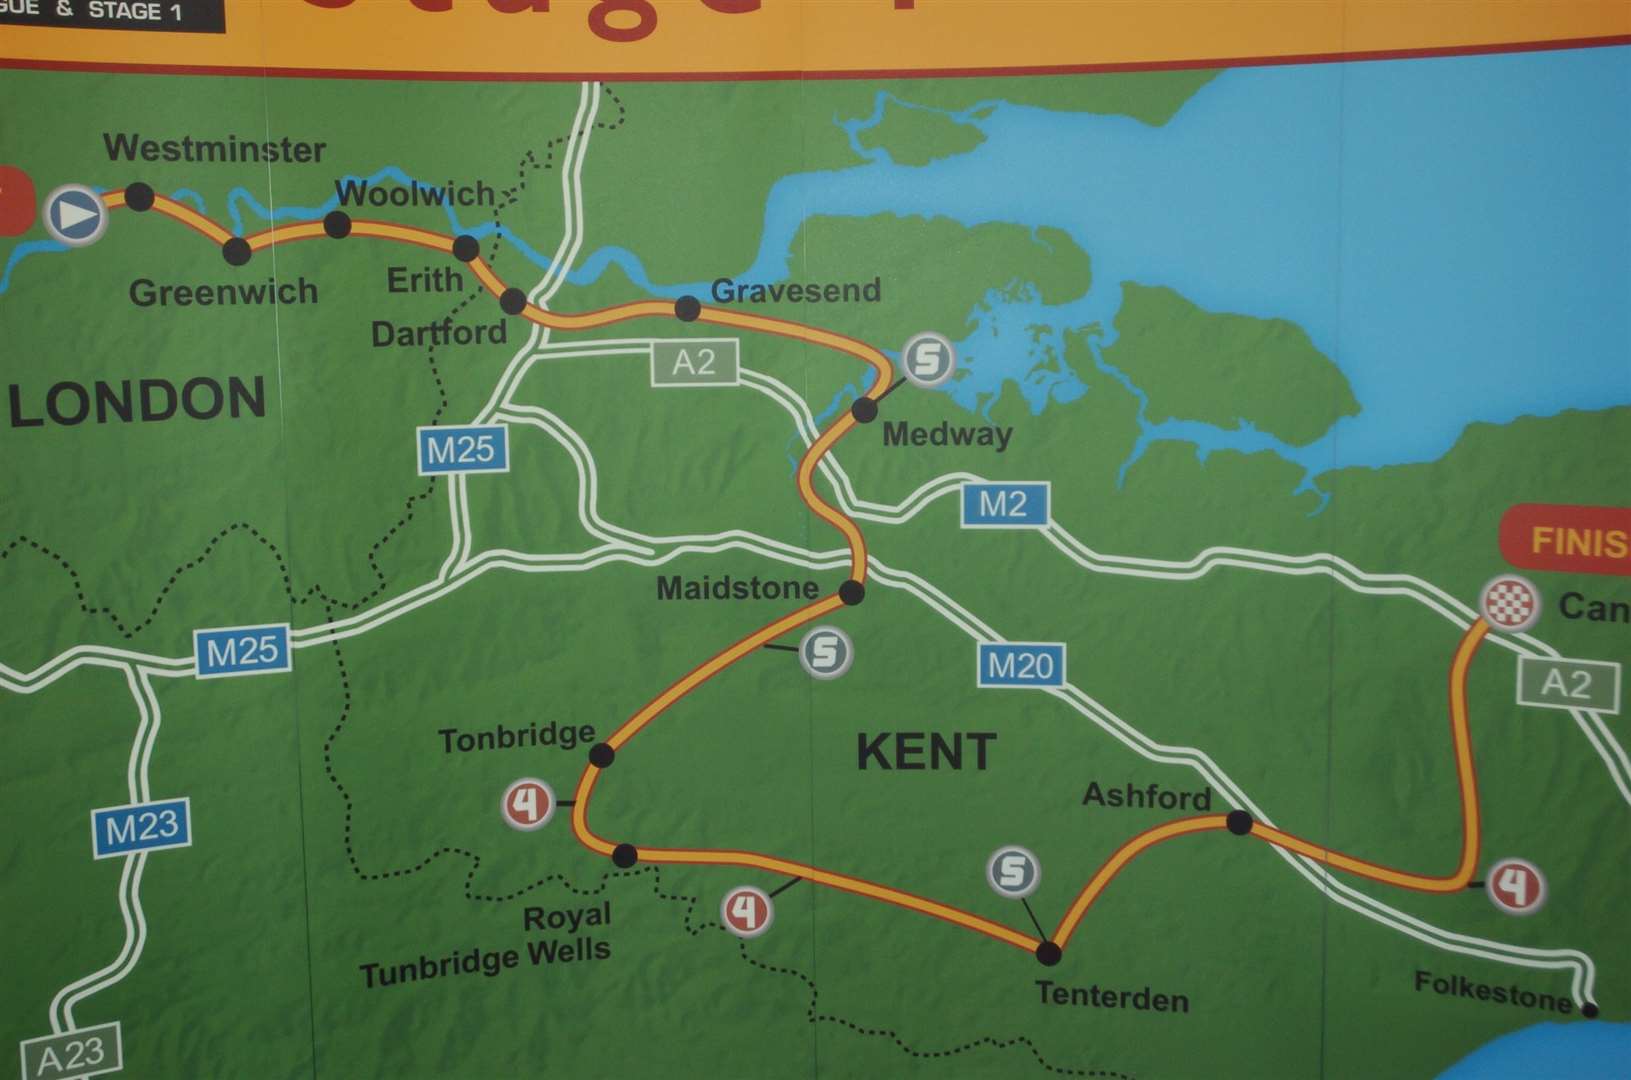 The 126-mile route from London to Canterbury